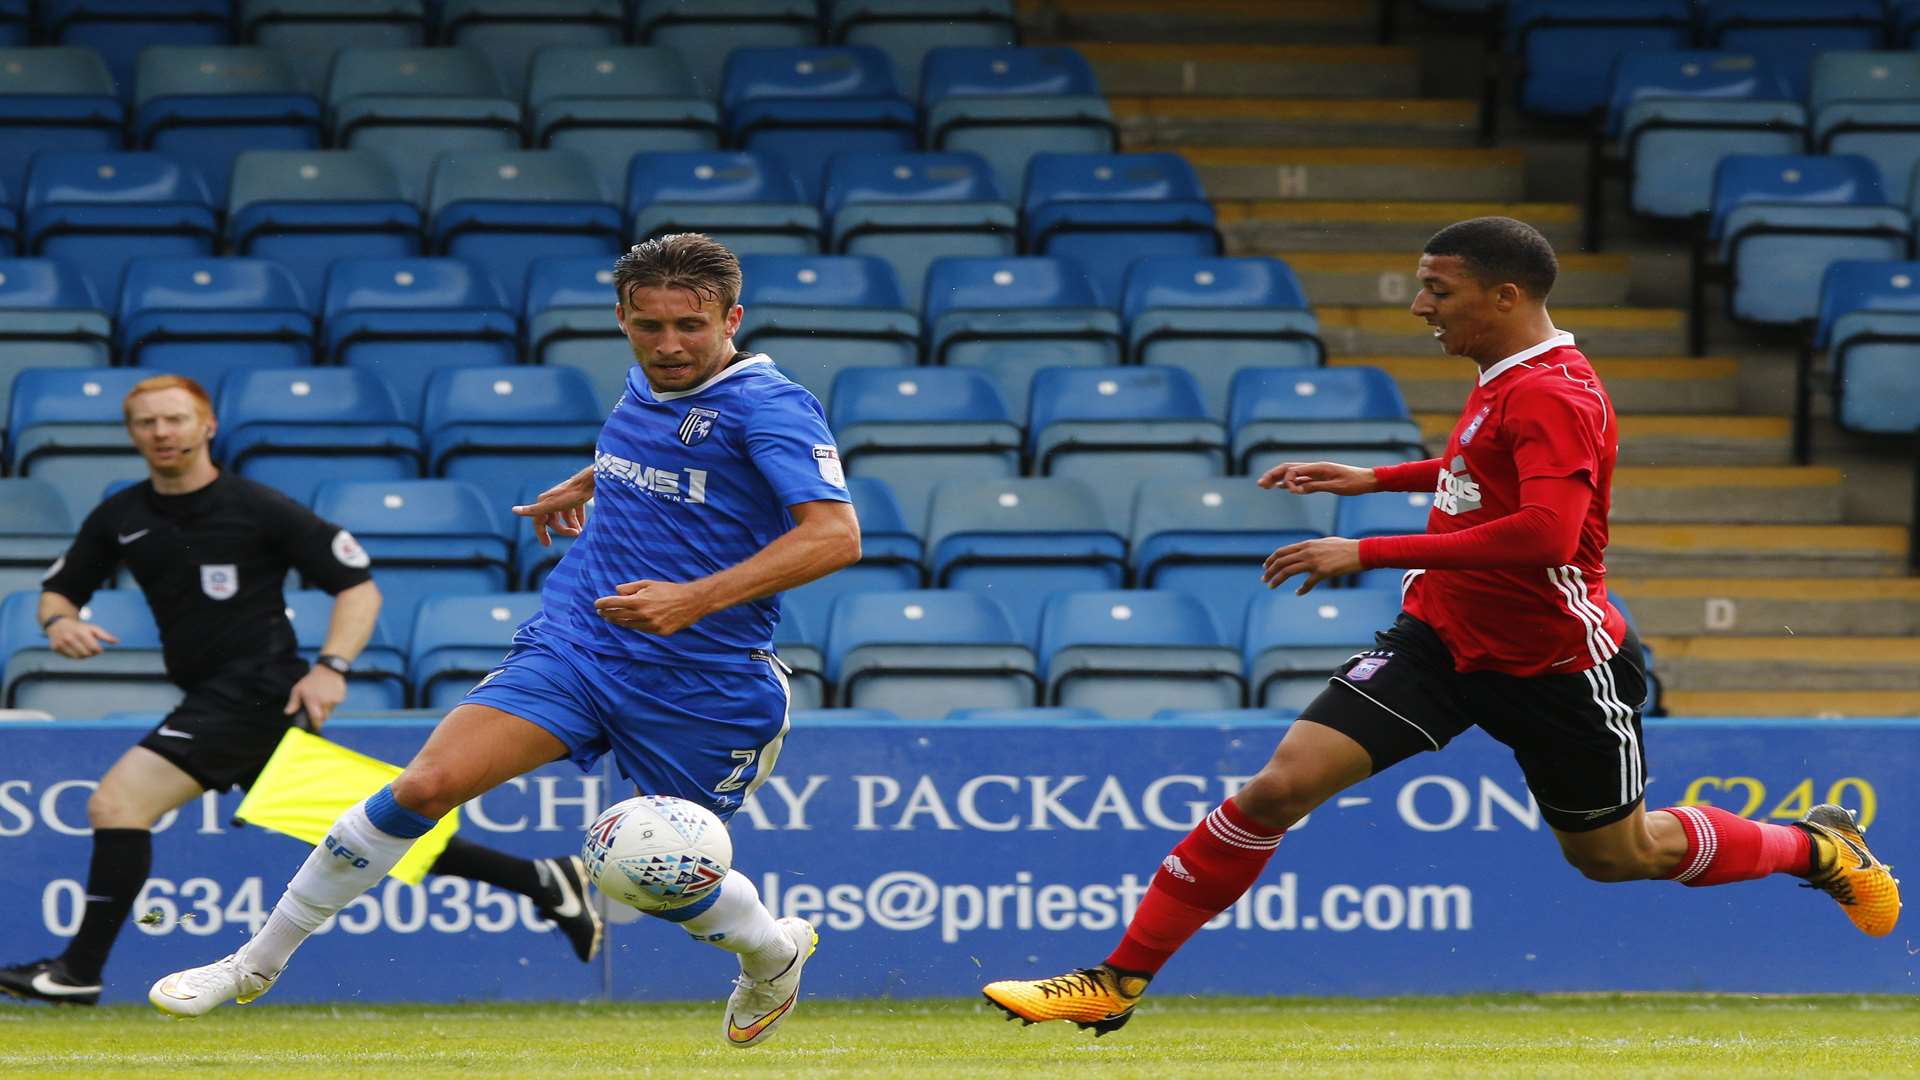 Luke O'Neill in 2017/18 pre-season action for Gills. Picture: Andy Jones